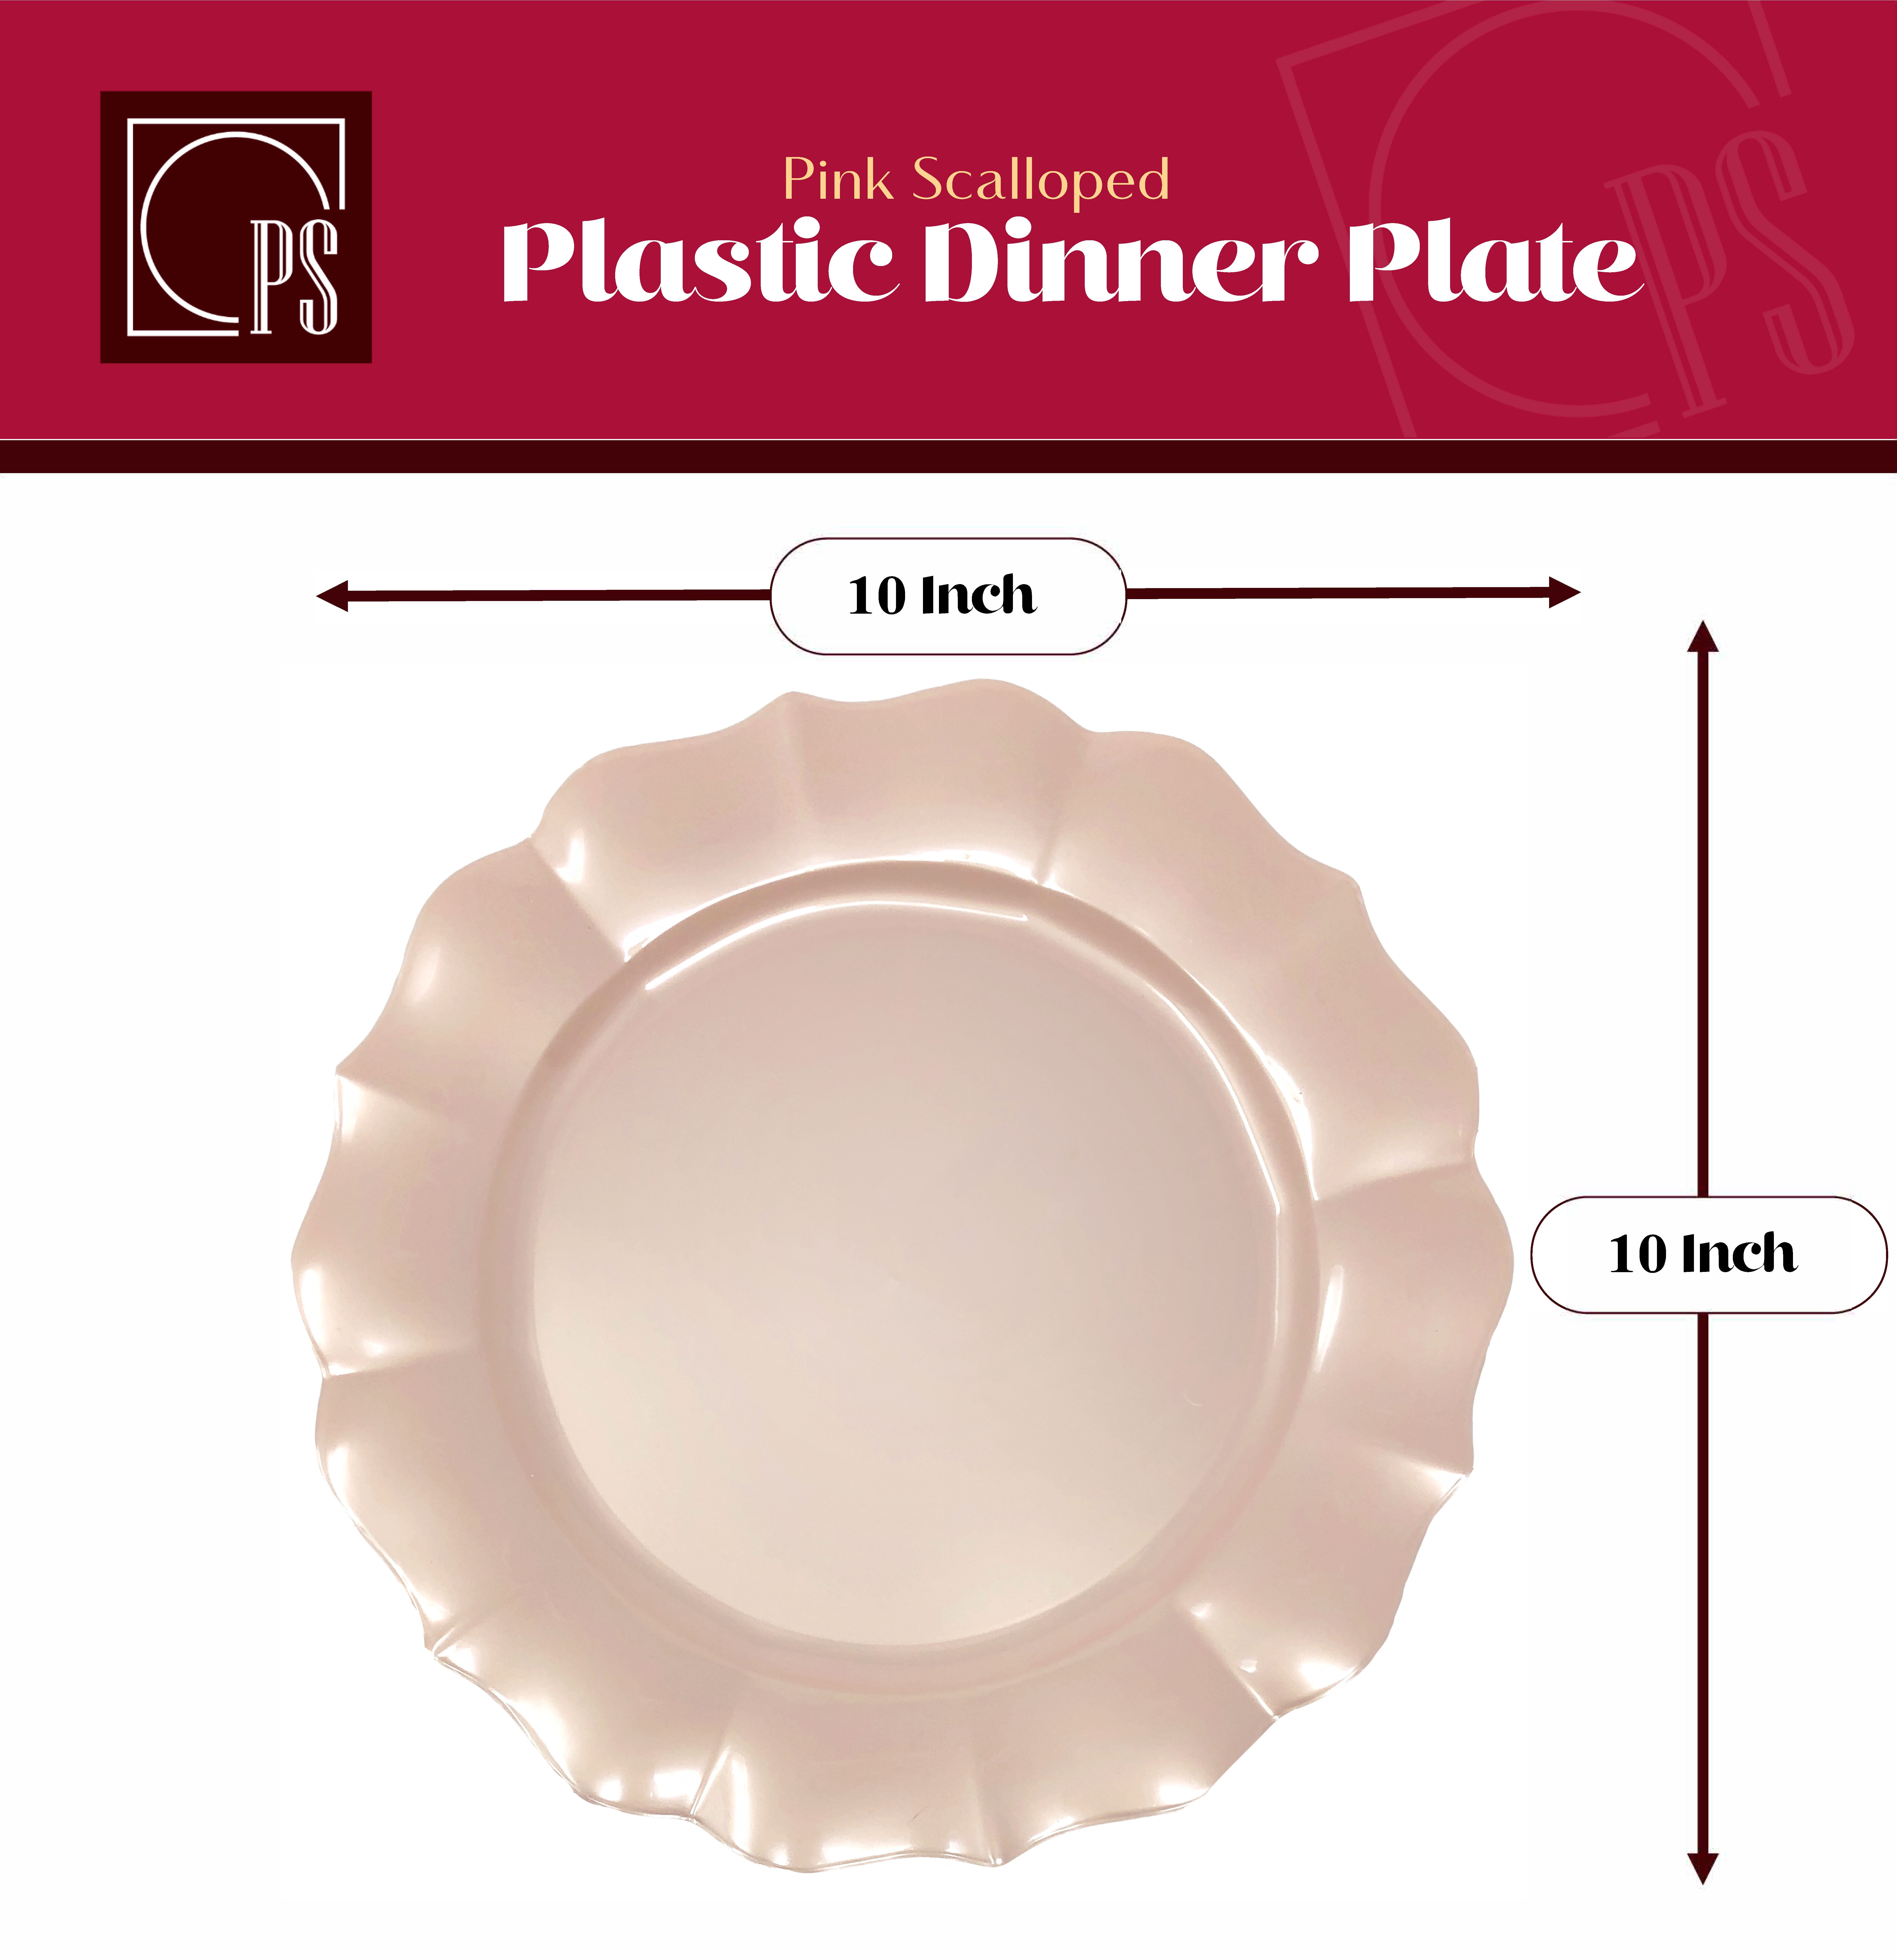 PERFECT SETTINGS Scalloped Edge 10 in. and 7 in. Clear Disposable Plastic  Combo Plates (Set of 25) FLWRPDL10-07 - The Home Depot